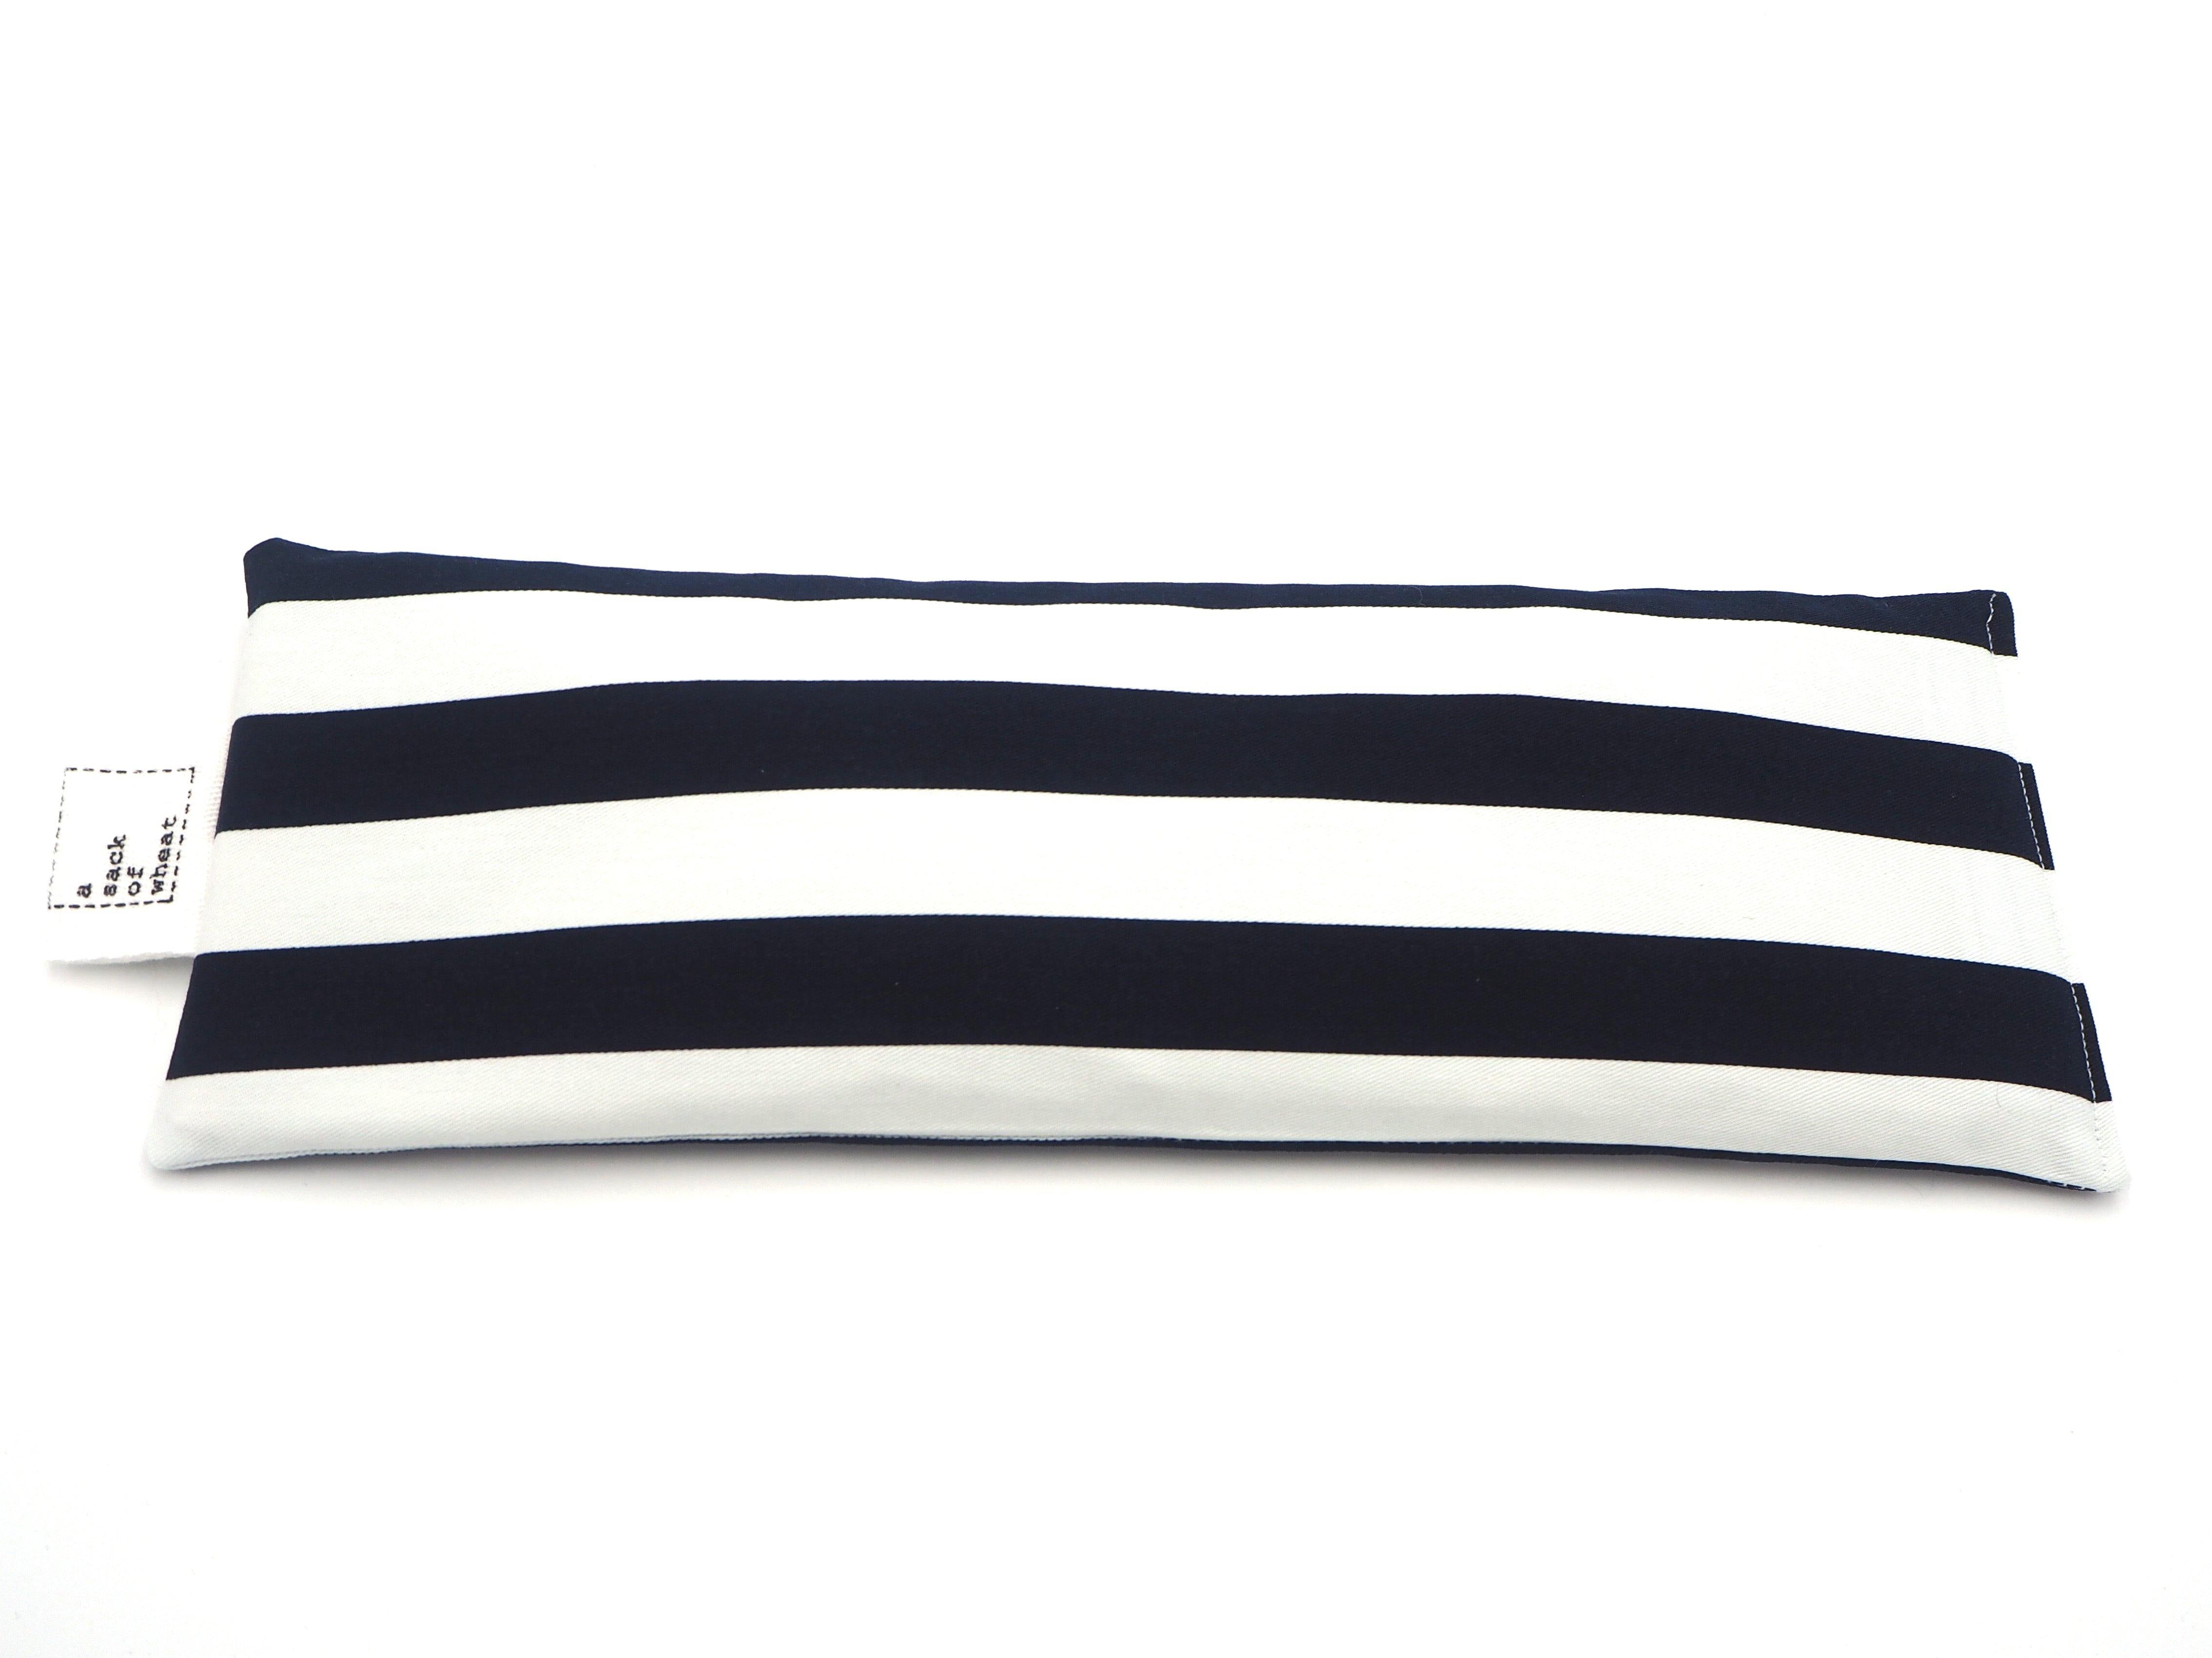 Flat view of A Sack Of Wheat, featuring a classic Navy & White striped print, 100% cotton fabric